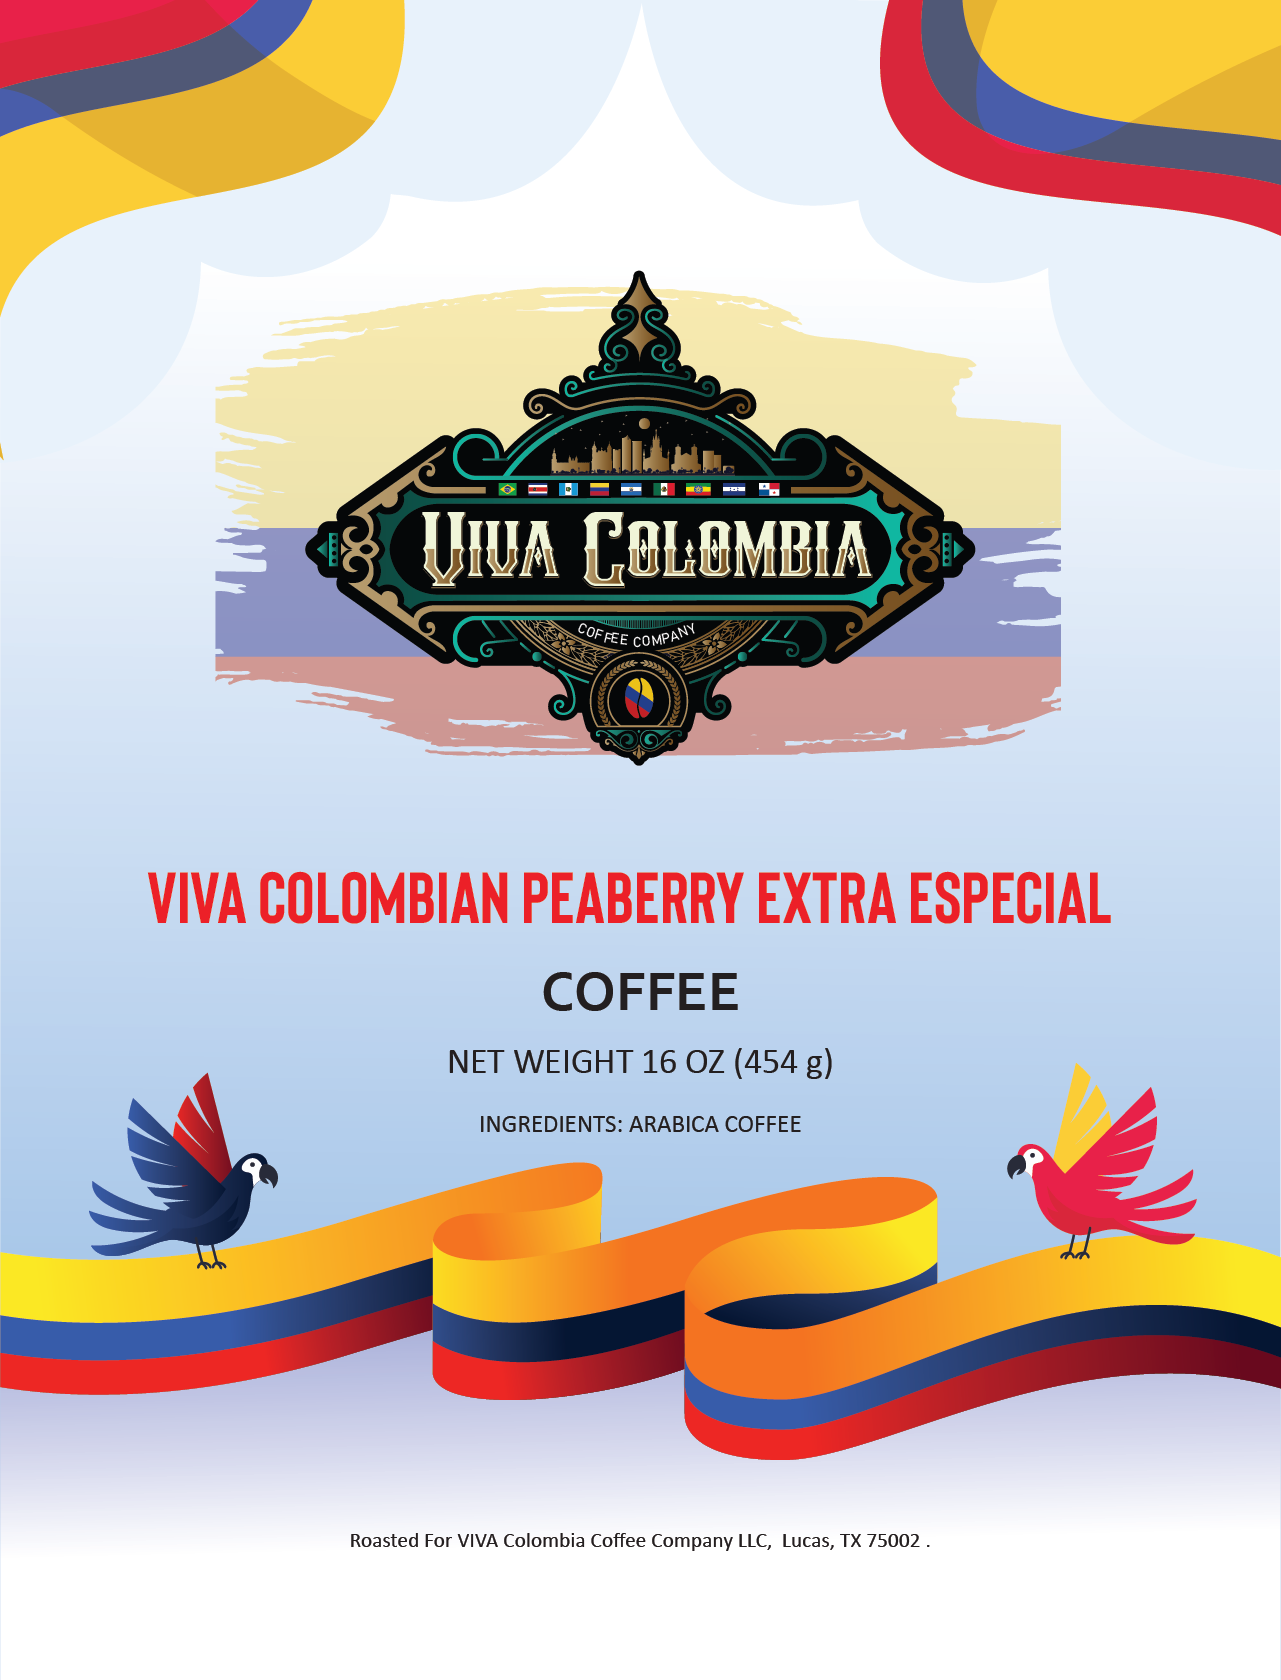 VIVA COLOMBIAN PEABERRY EXTRA ESPECIAL